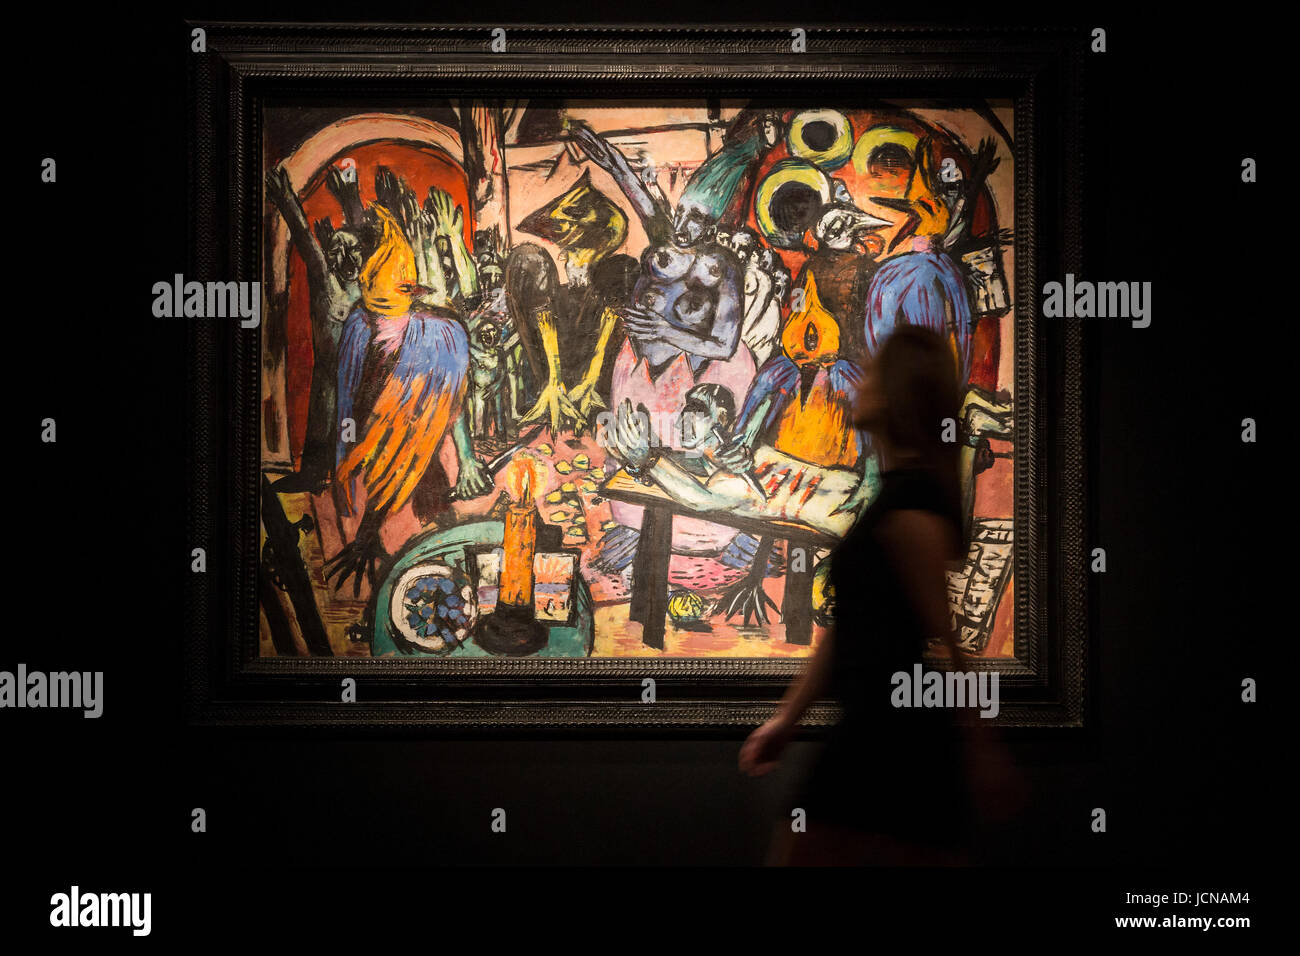 London, UK. 16 June 2017. A Christie's employee poses with the painting Birds' Hell (Hoelle der Voegel), 1938 by Max Beckmann, est on request. Auction house Christie's presents a preview of the Impressionist and Modern Art evening sale on 27 June 2017. The sale is part of 20th Century at Christie's and is led by a group of masterpiece paintings by Max Beckmann, Claude Monet, Pablo Picasso, Egon Schiele and Vincent van Gogh. Stock Photo